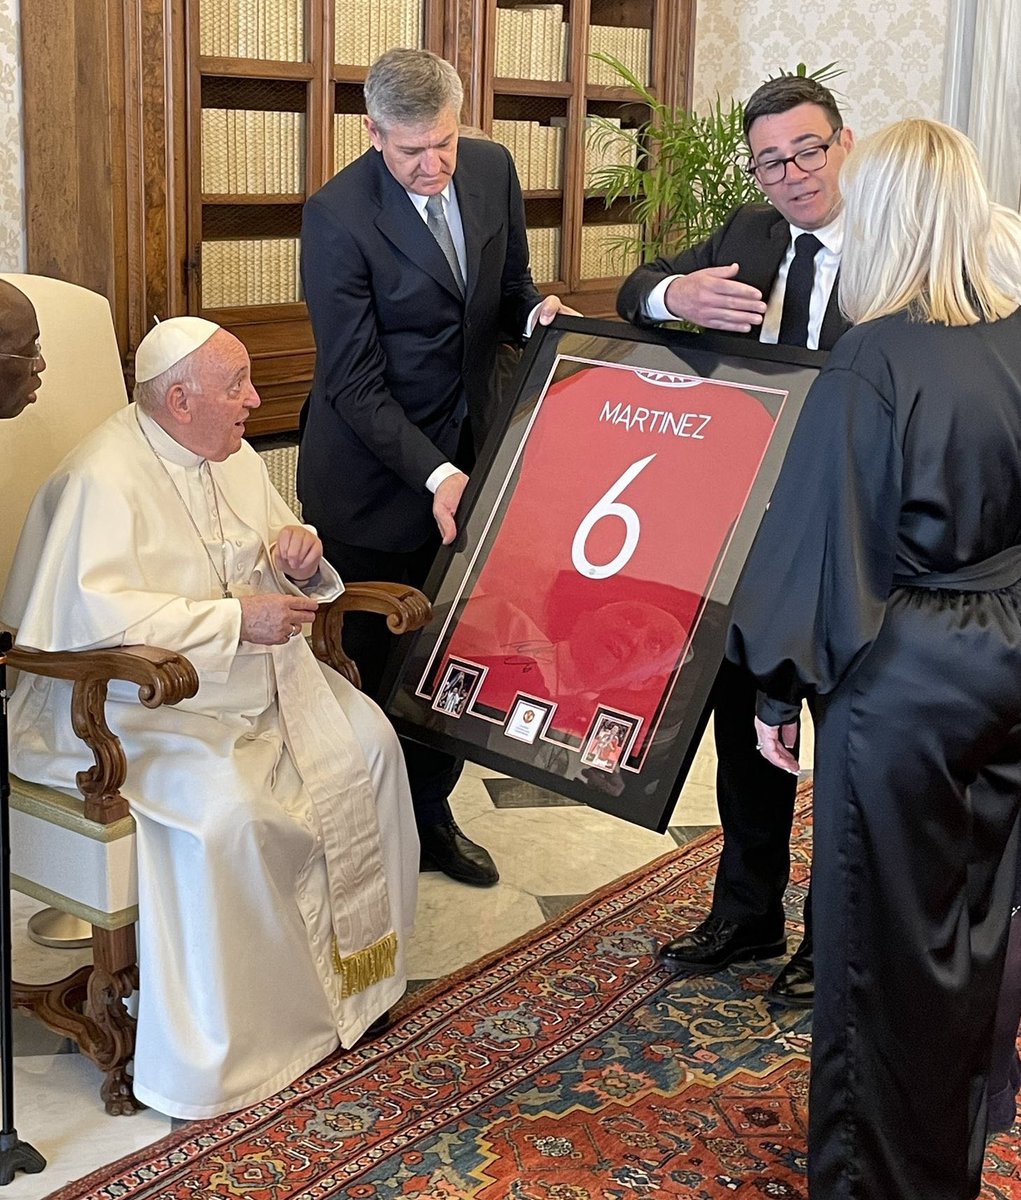 Pope Francis presented with a Lisandro Martínez shirt 🇦🇷